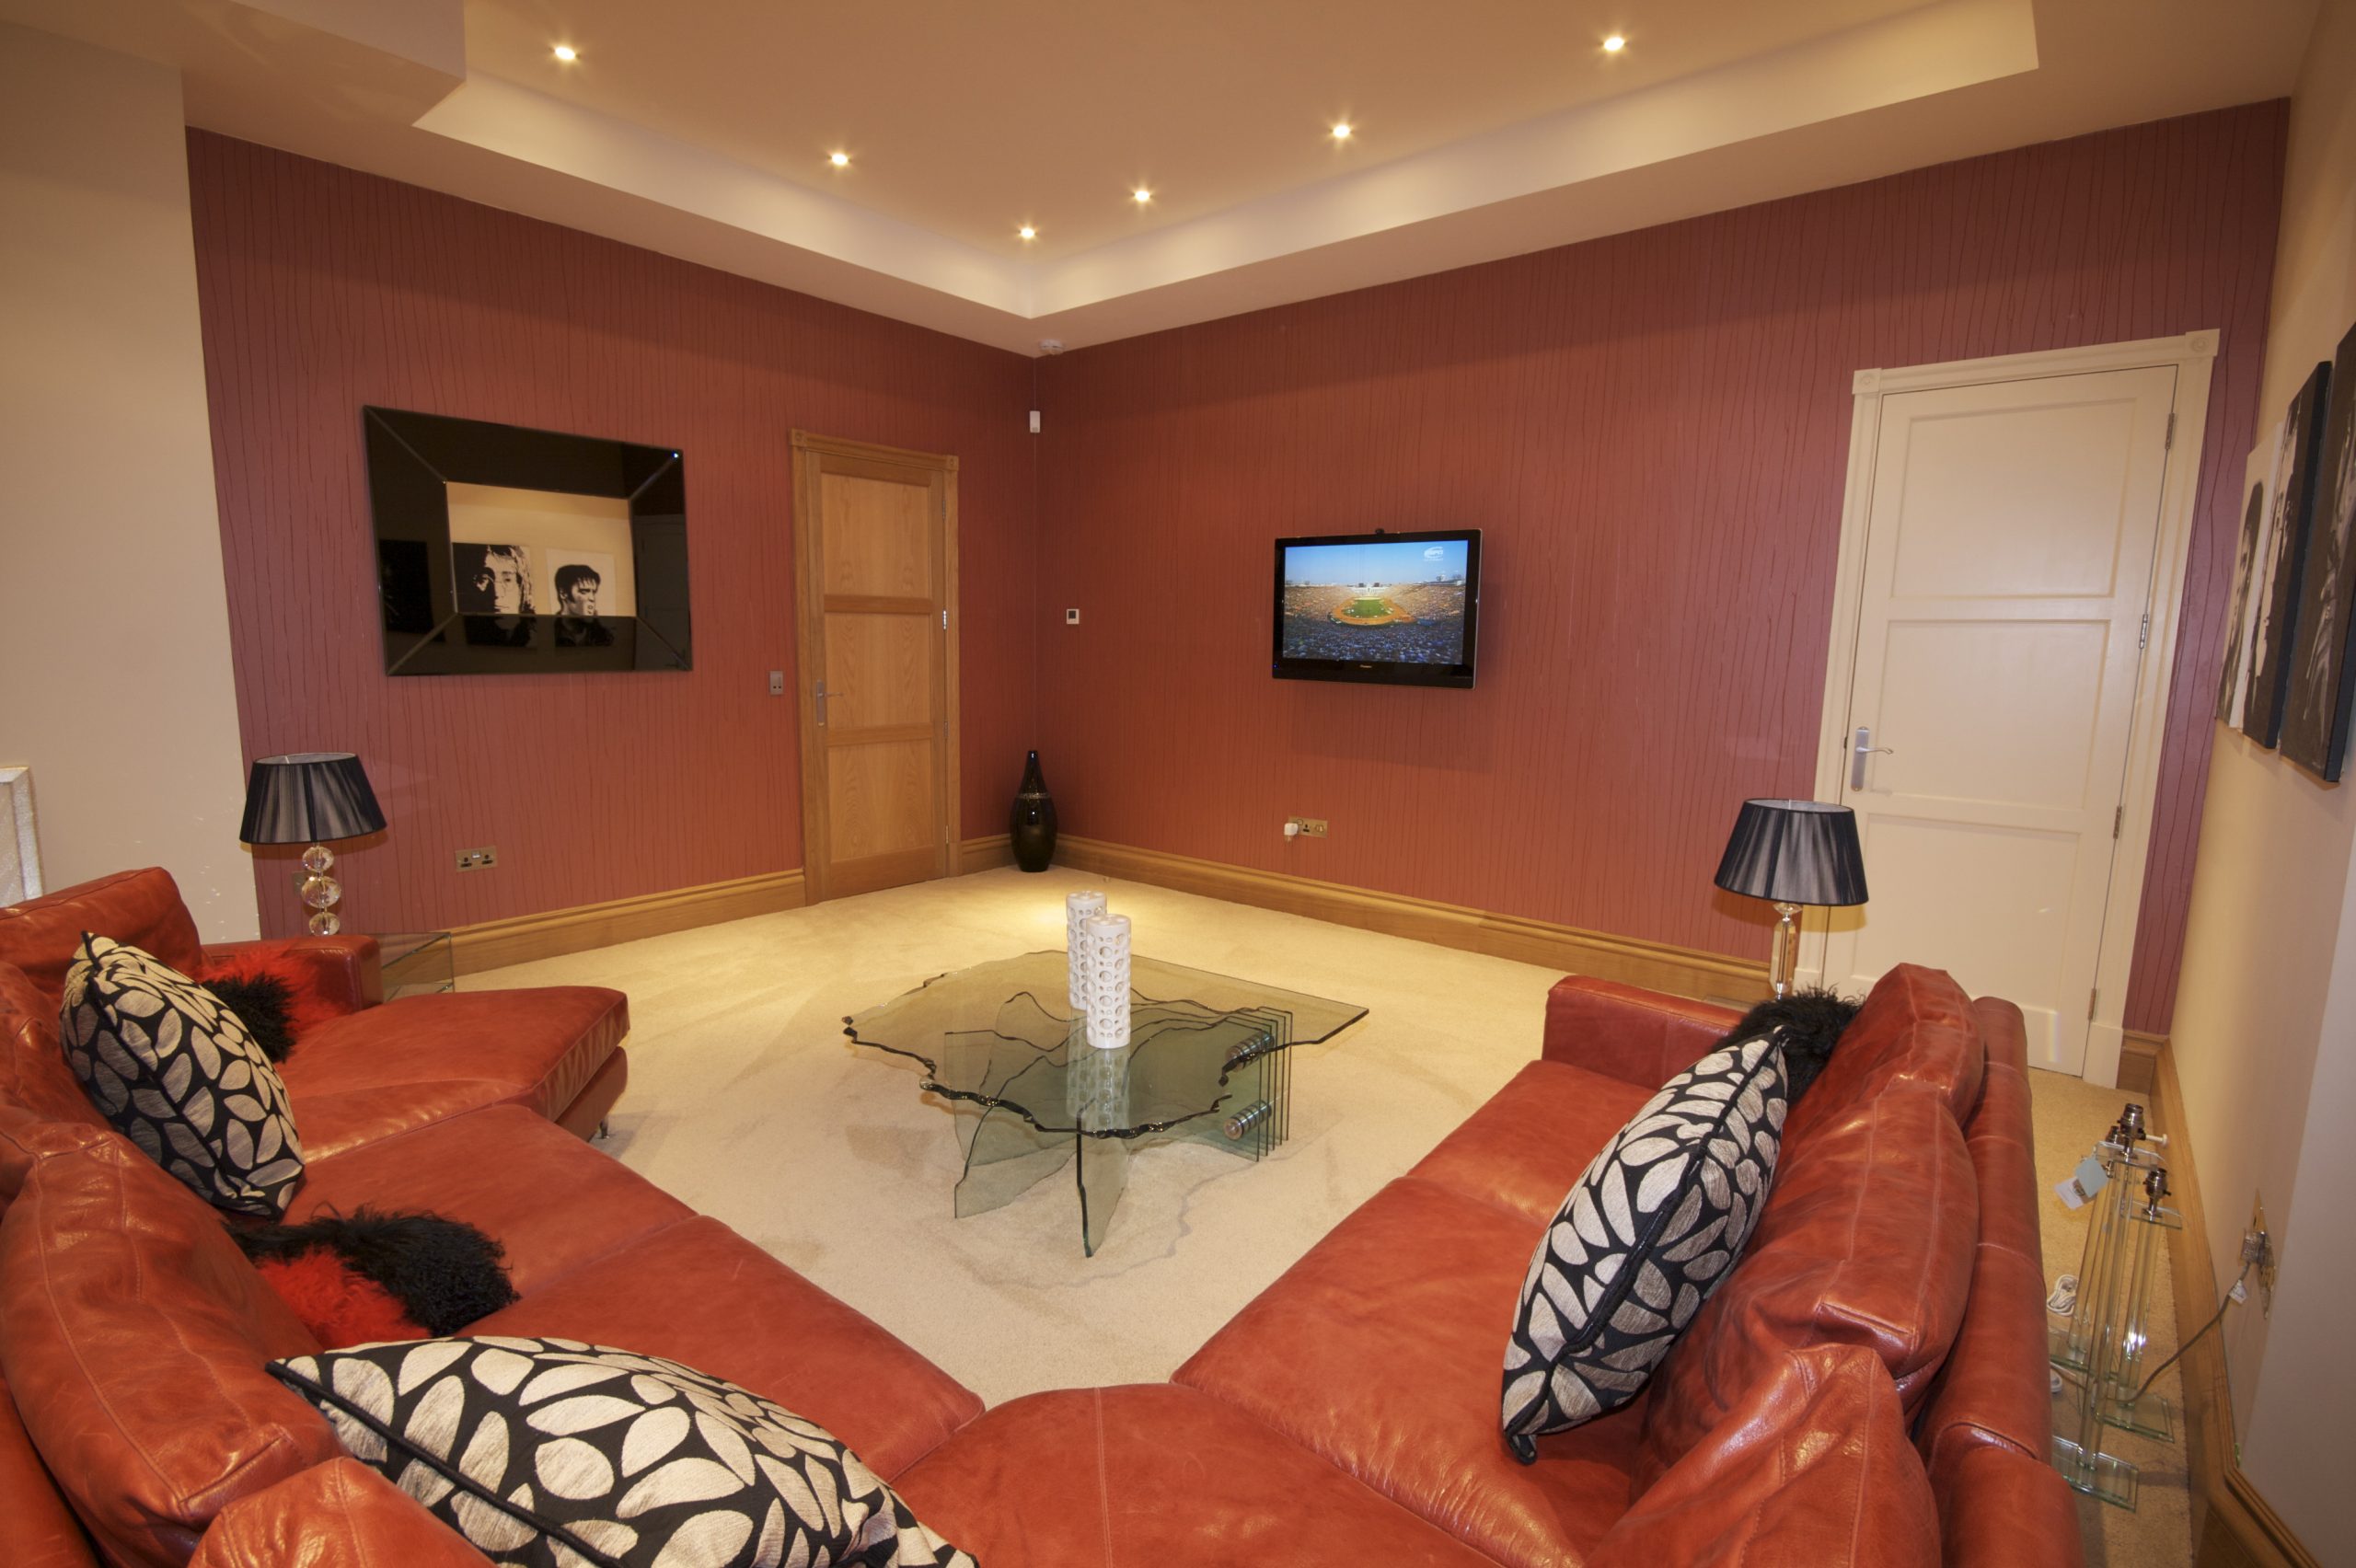 Family room with invisible speakers, part of a whole home technology solution.